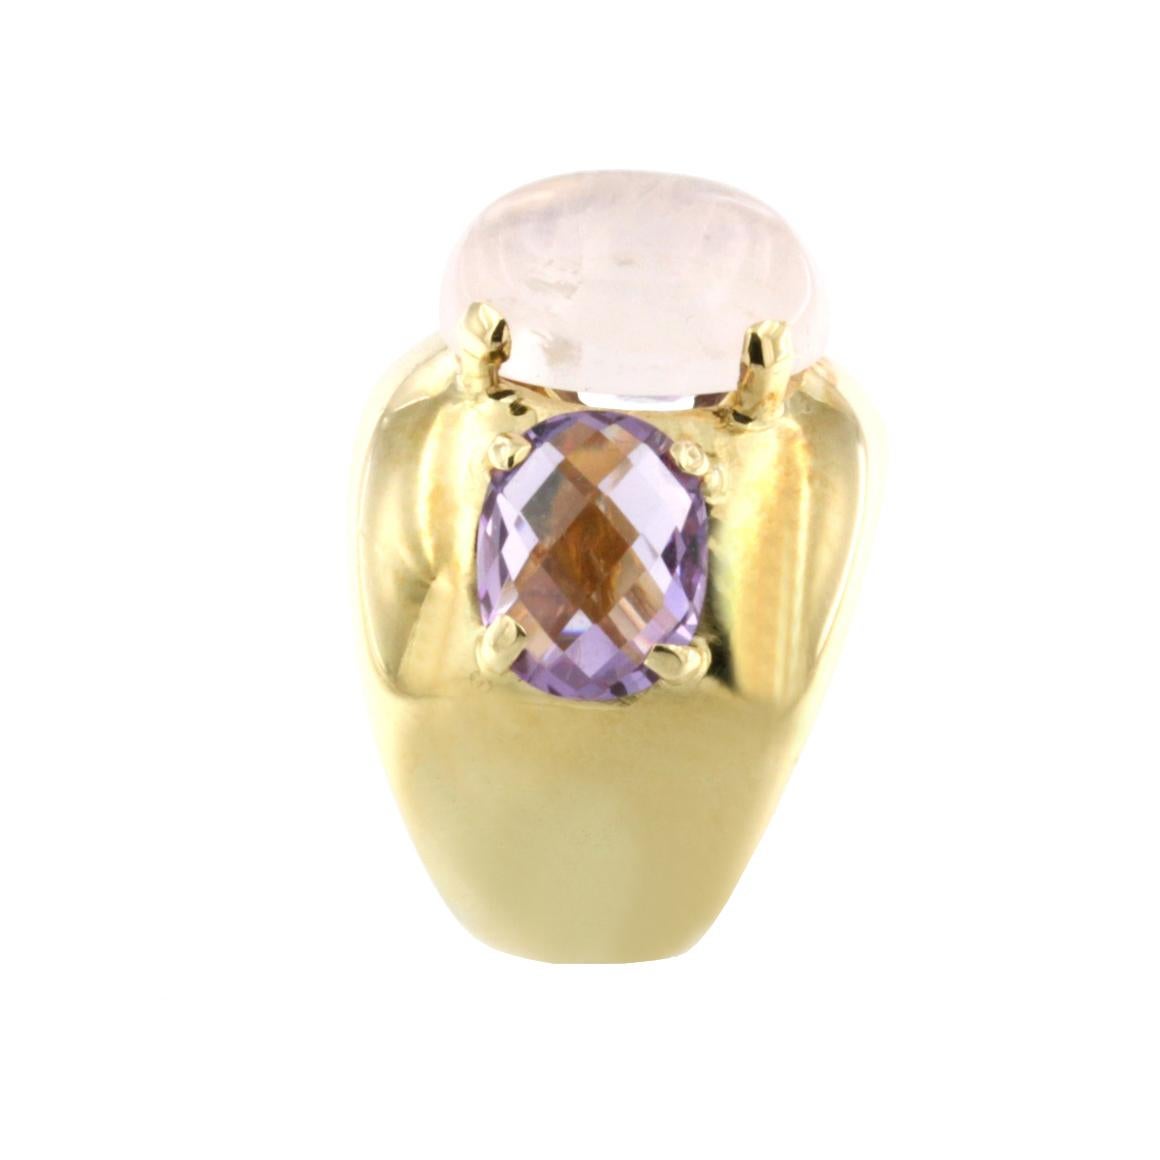  Combination of shapes and colors made a unique fashion and modern ring in 18k yellow gold with colored stones. Made in Italy by Stanoppi Jewellery since 1948.
Ring in 18k yellow gold with Pink Quartz (oval cabochon cut, size: 14x10 mm) and Amethyst